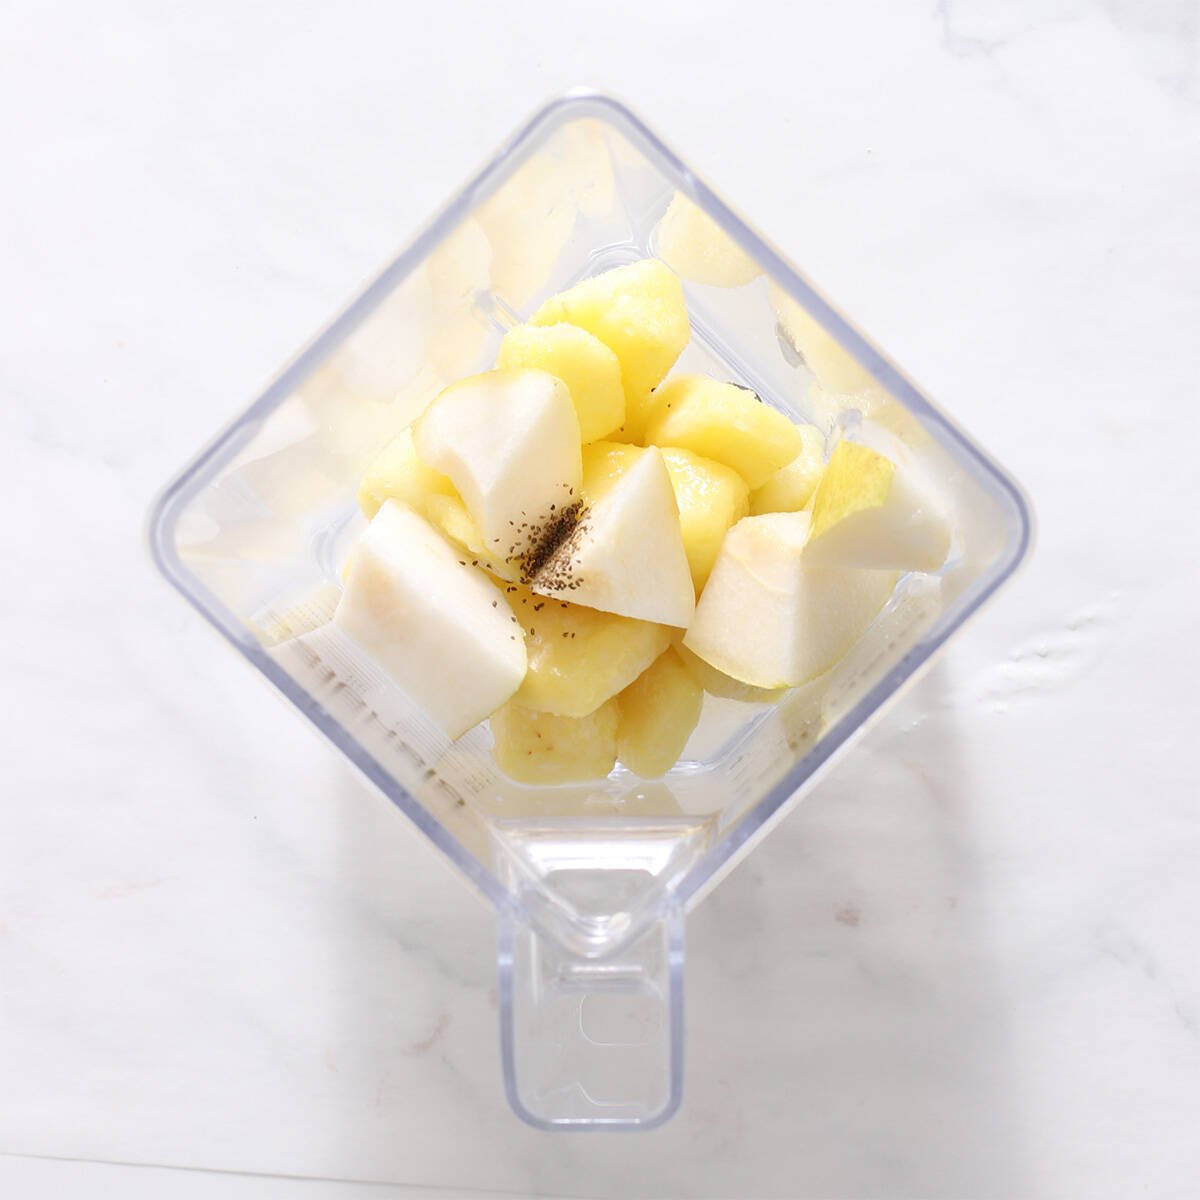 ingredients for a pineapple smoothie in a blender jar.